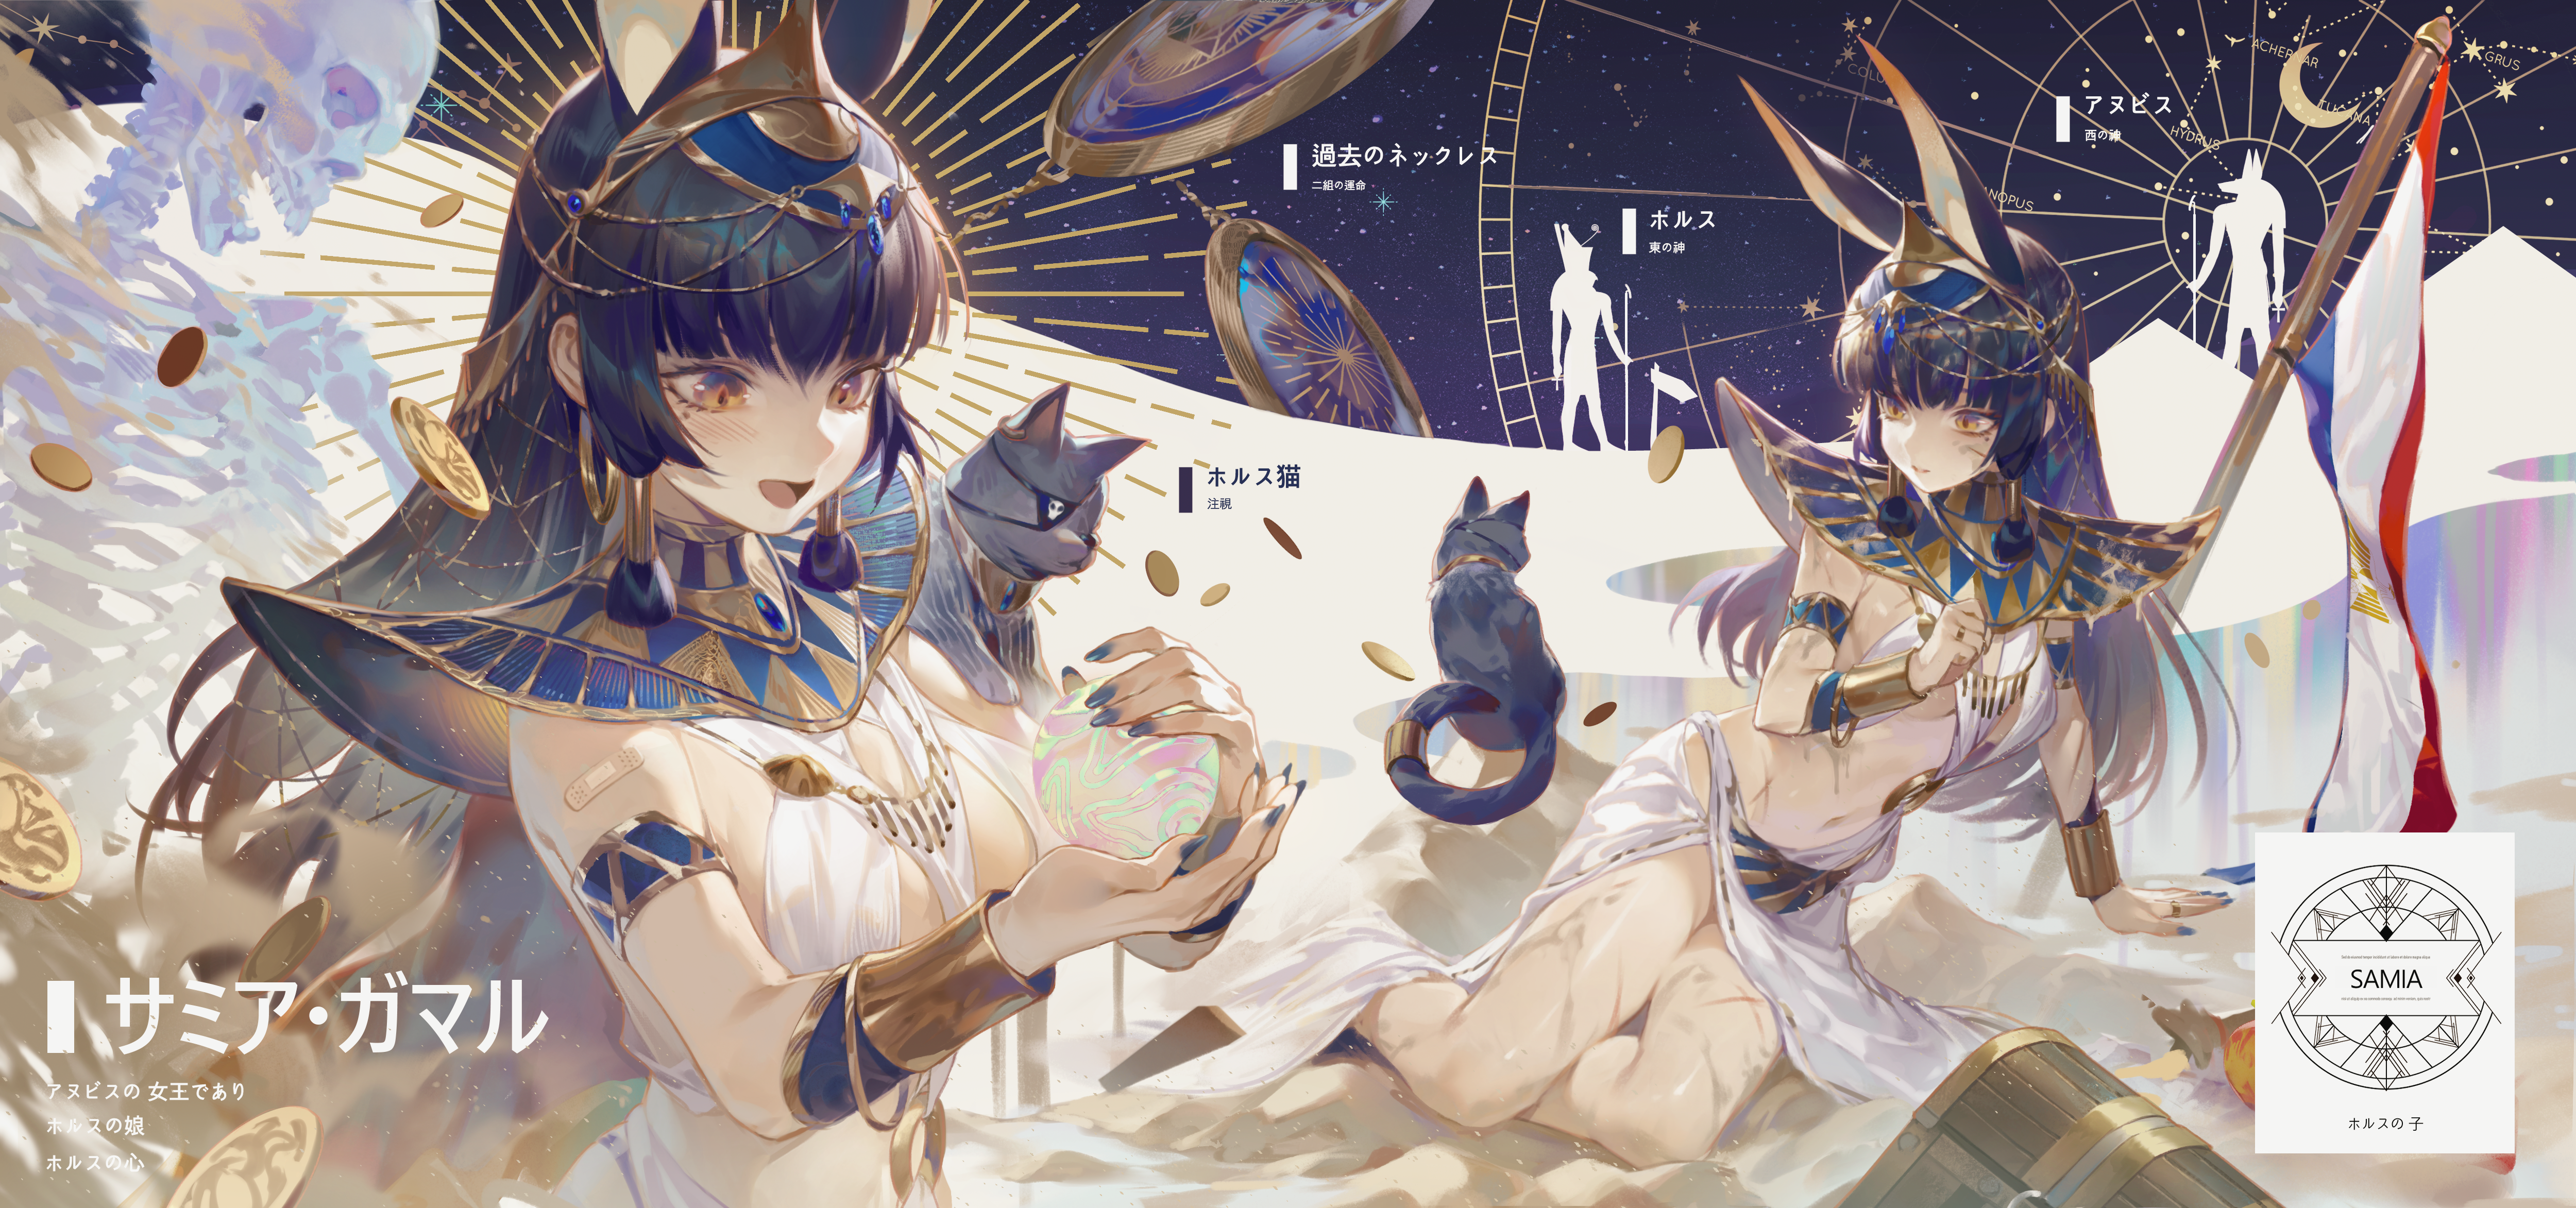 Anime 5000x2345 anime anime girls Japanese big boobs blushing long hair cats animals coins flag crescent moon skeleton chests text